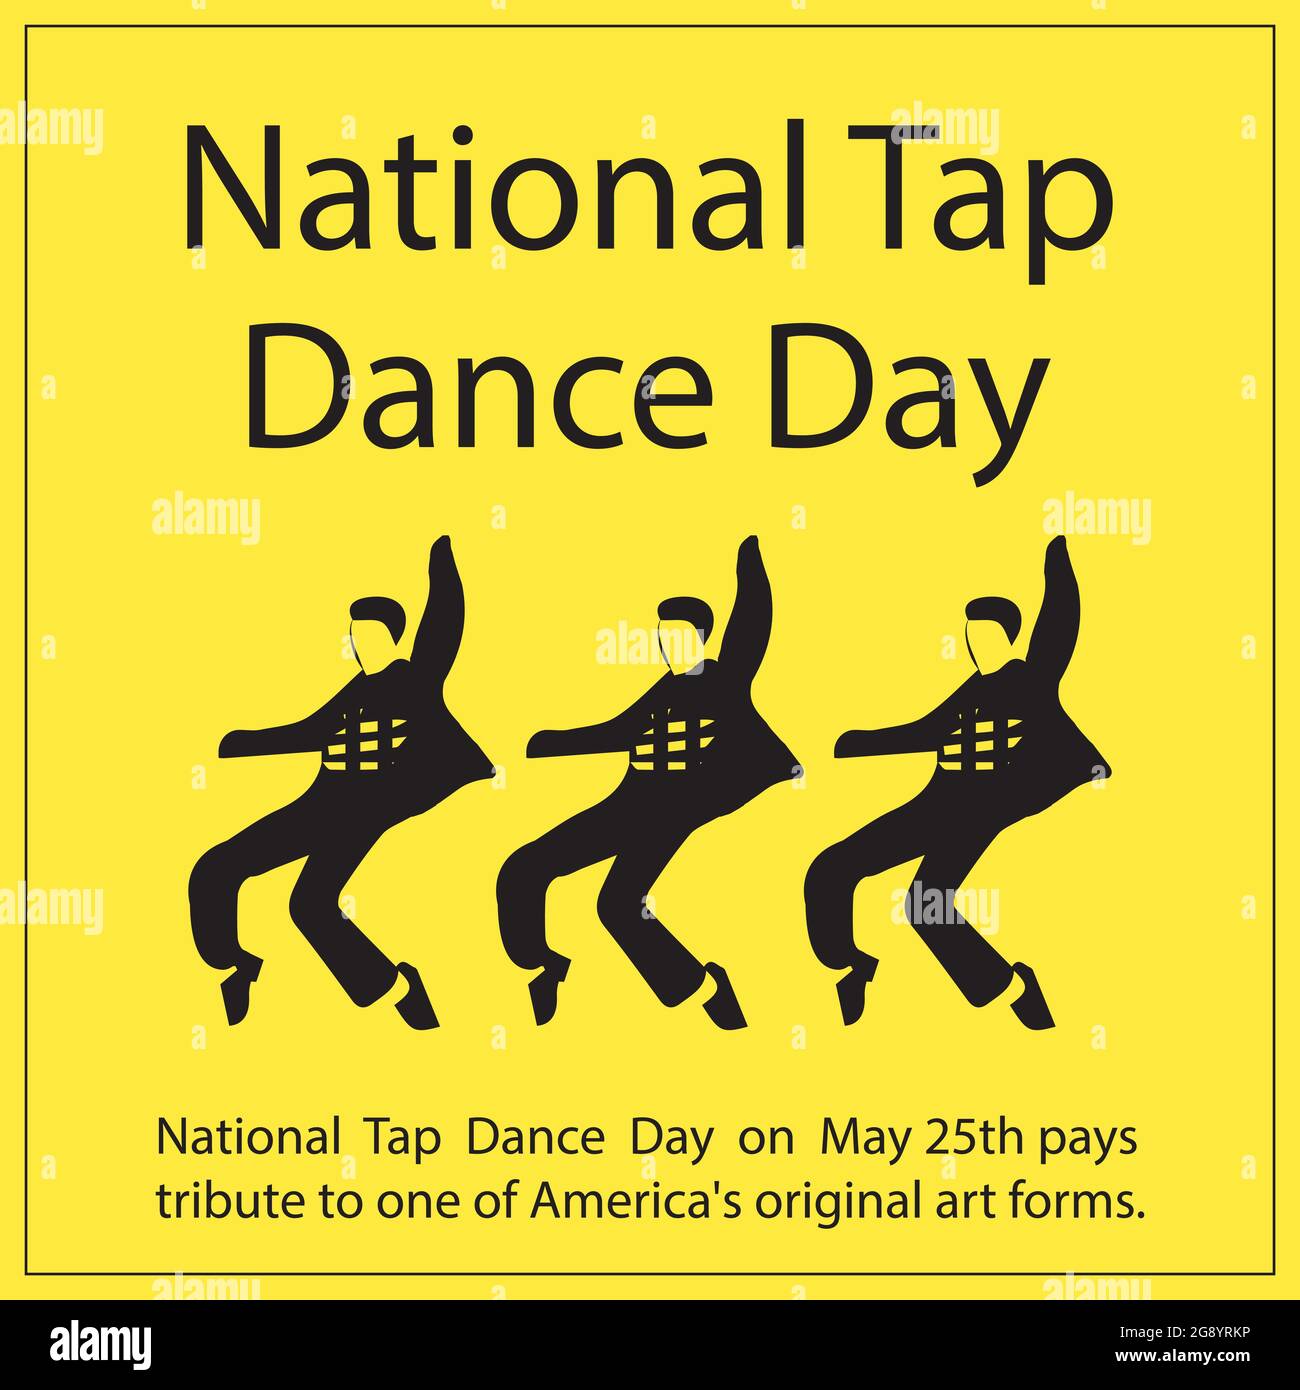 National Tap Dance Day on May 25th pays tribute to one of America's original art forms. Stock Vector